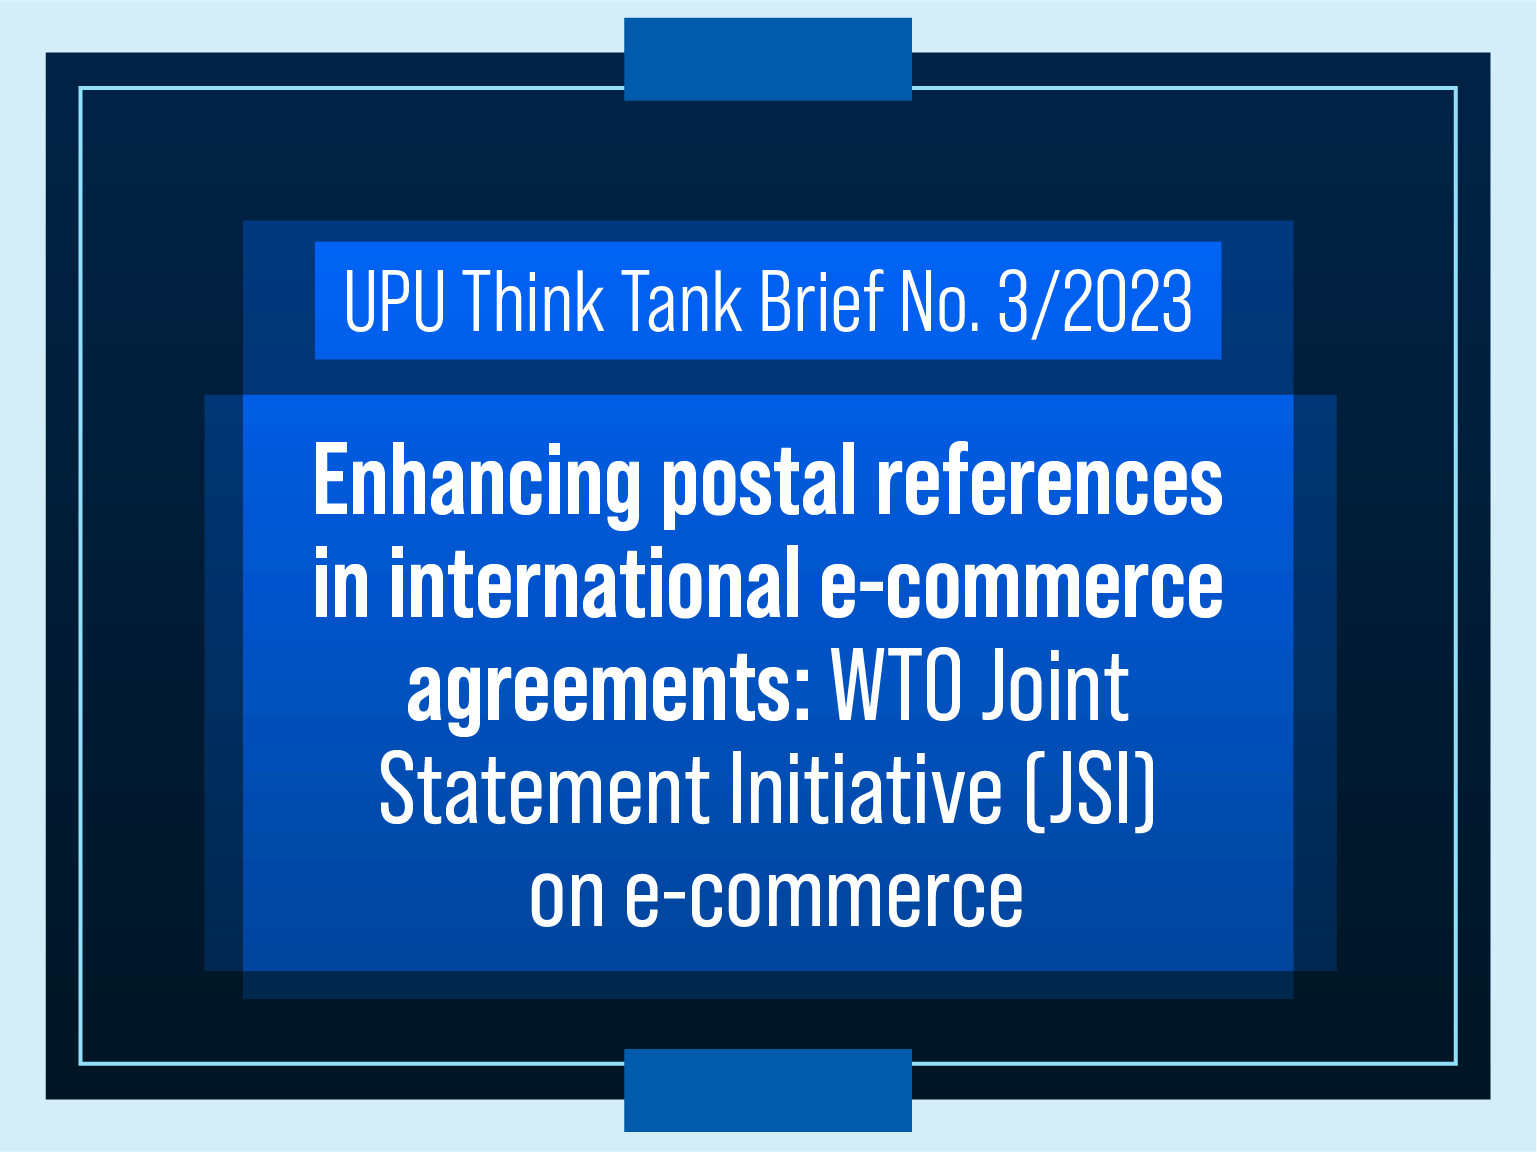 Enhancing postal references in international e-commerce agreements: WTO Joint Statement Initiative (JSI) on e-commerce